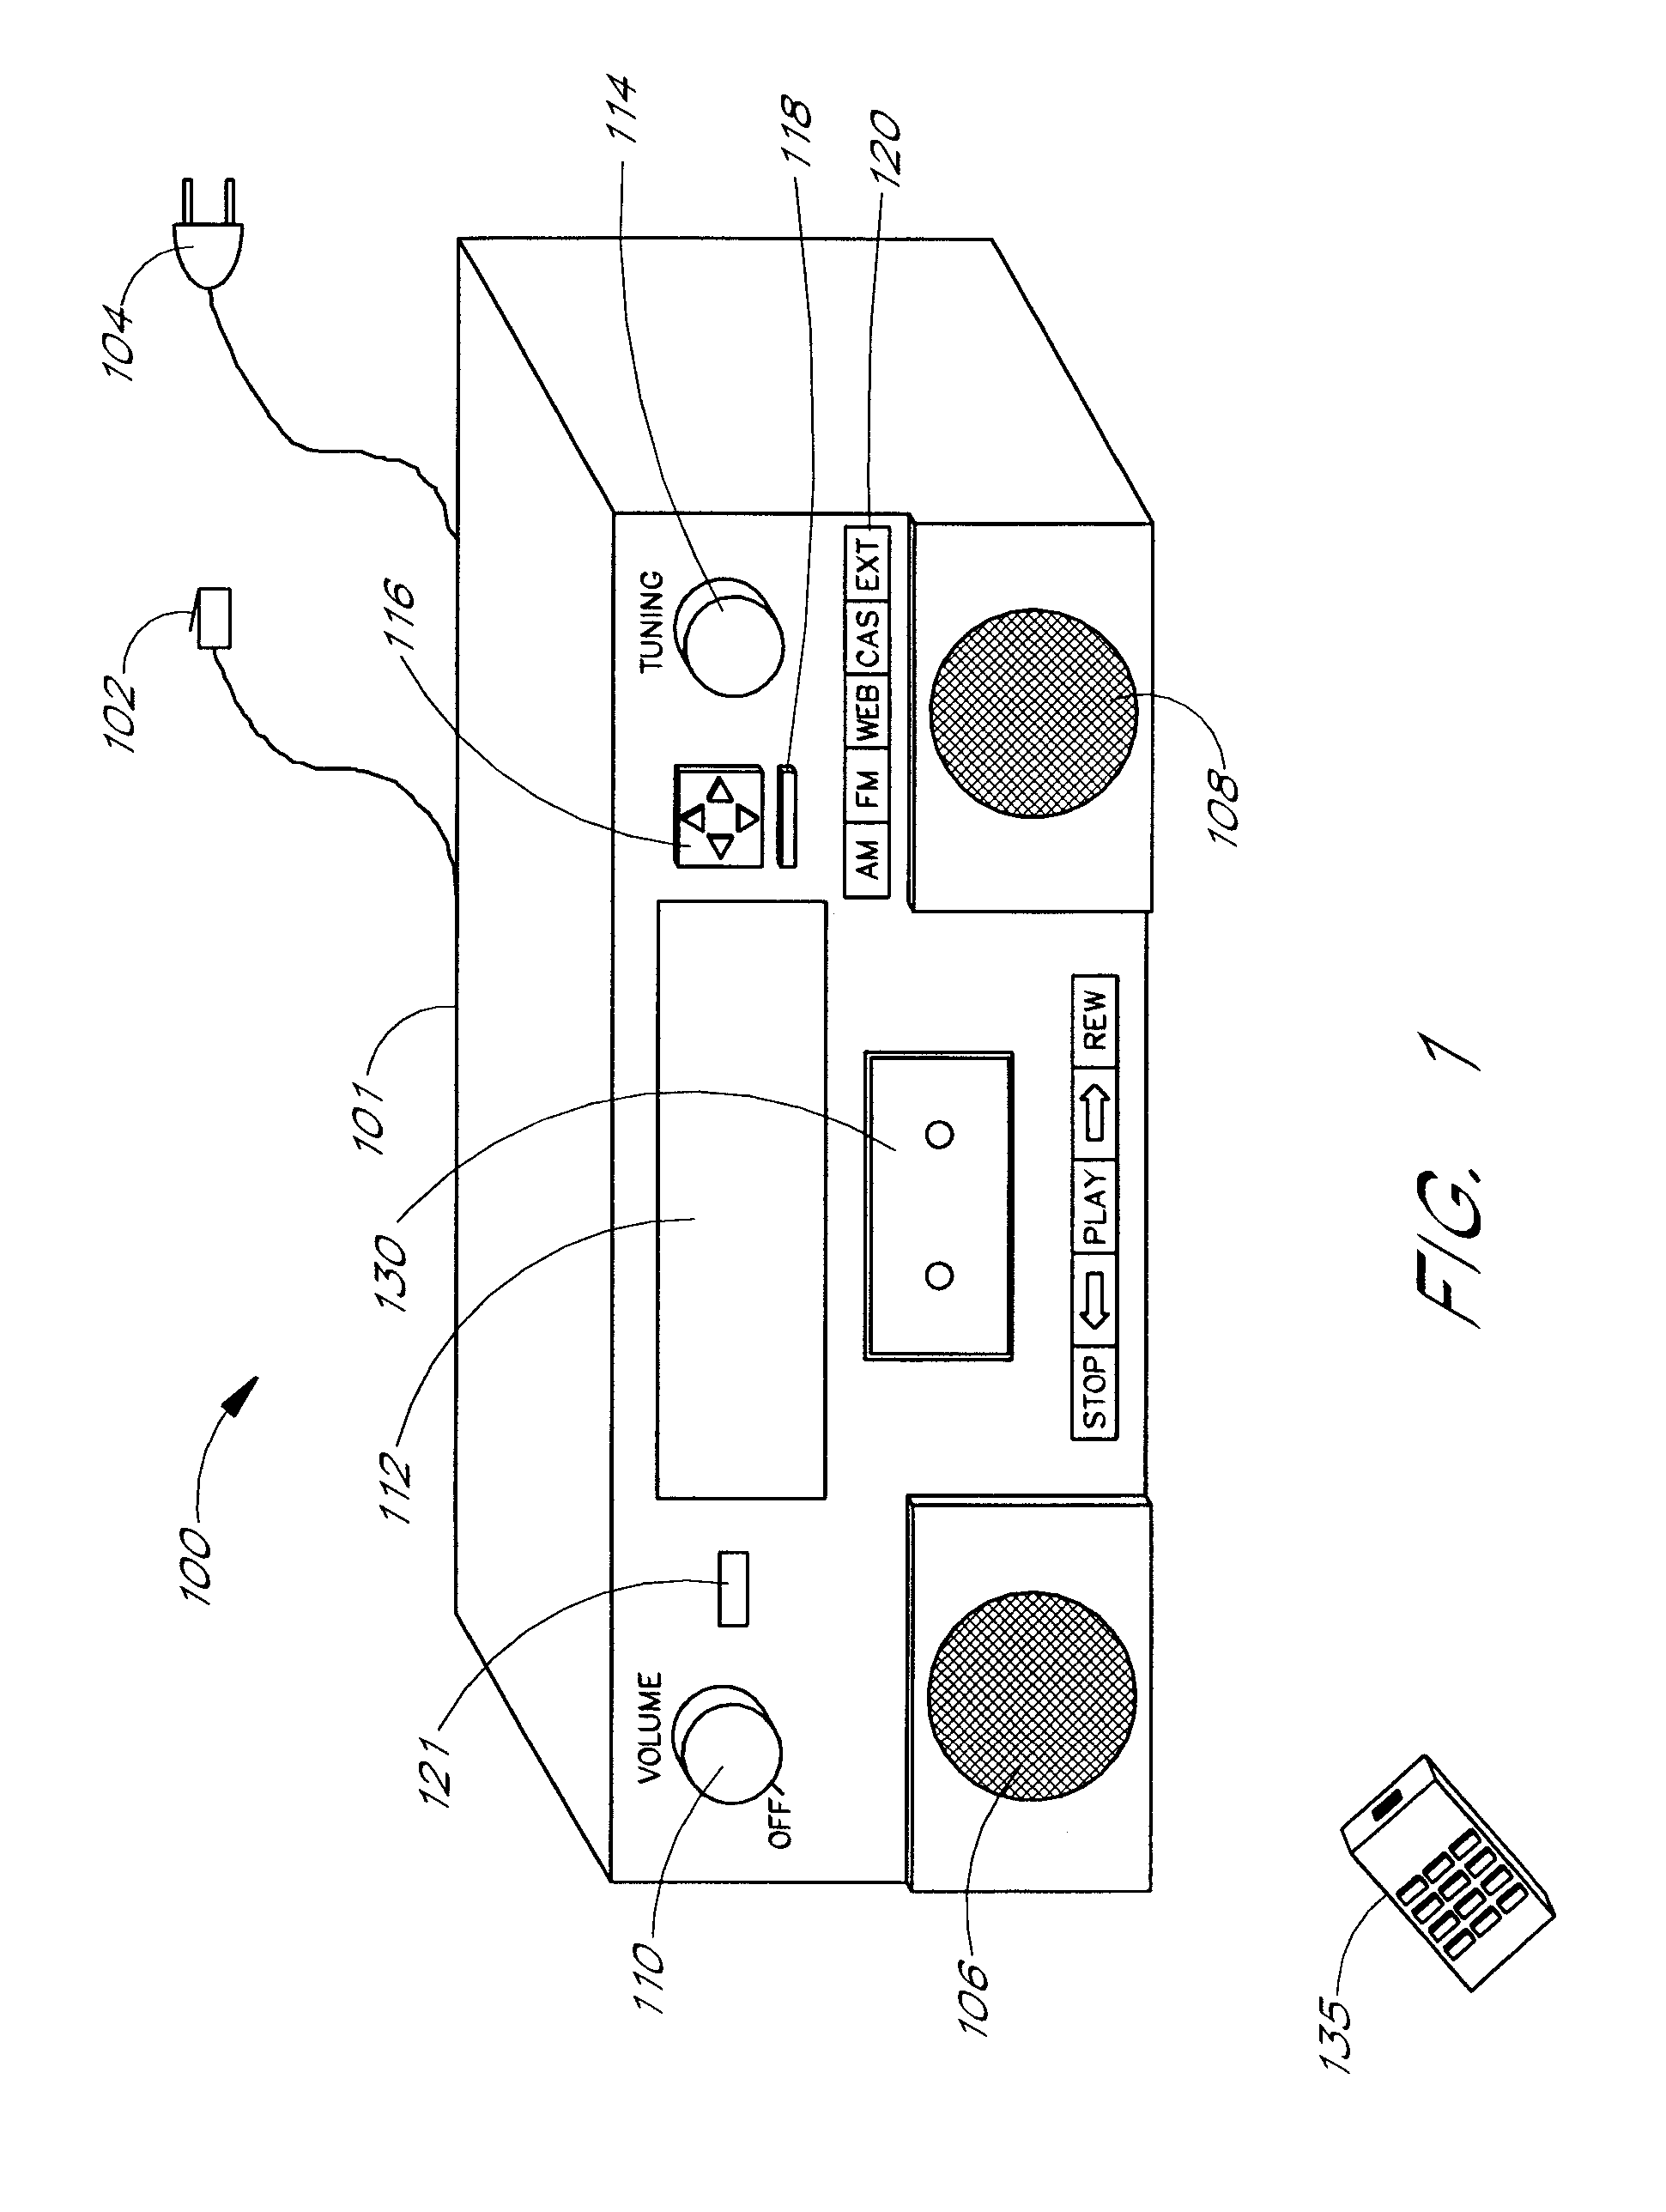 Network-enabled audio device and radio site